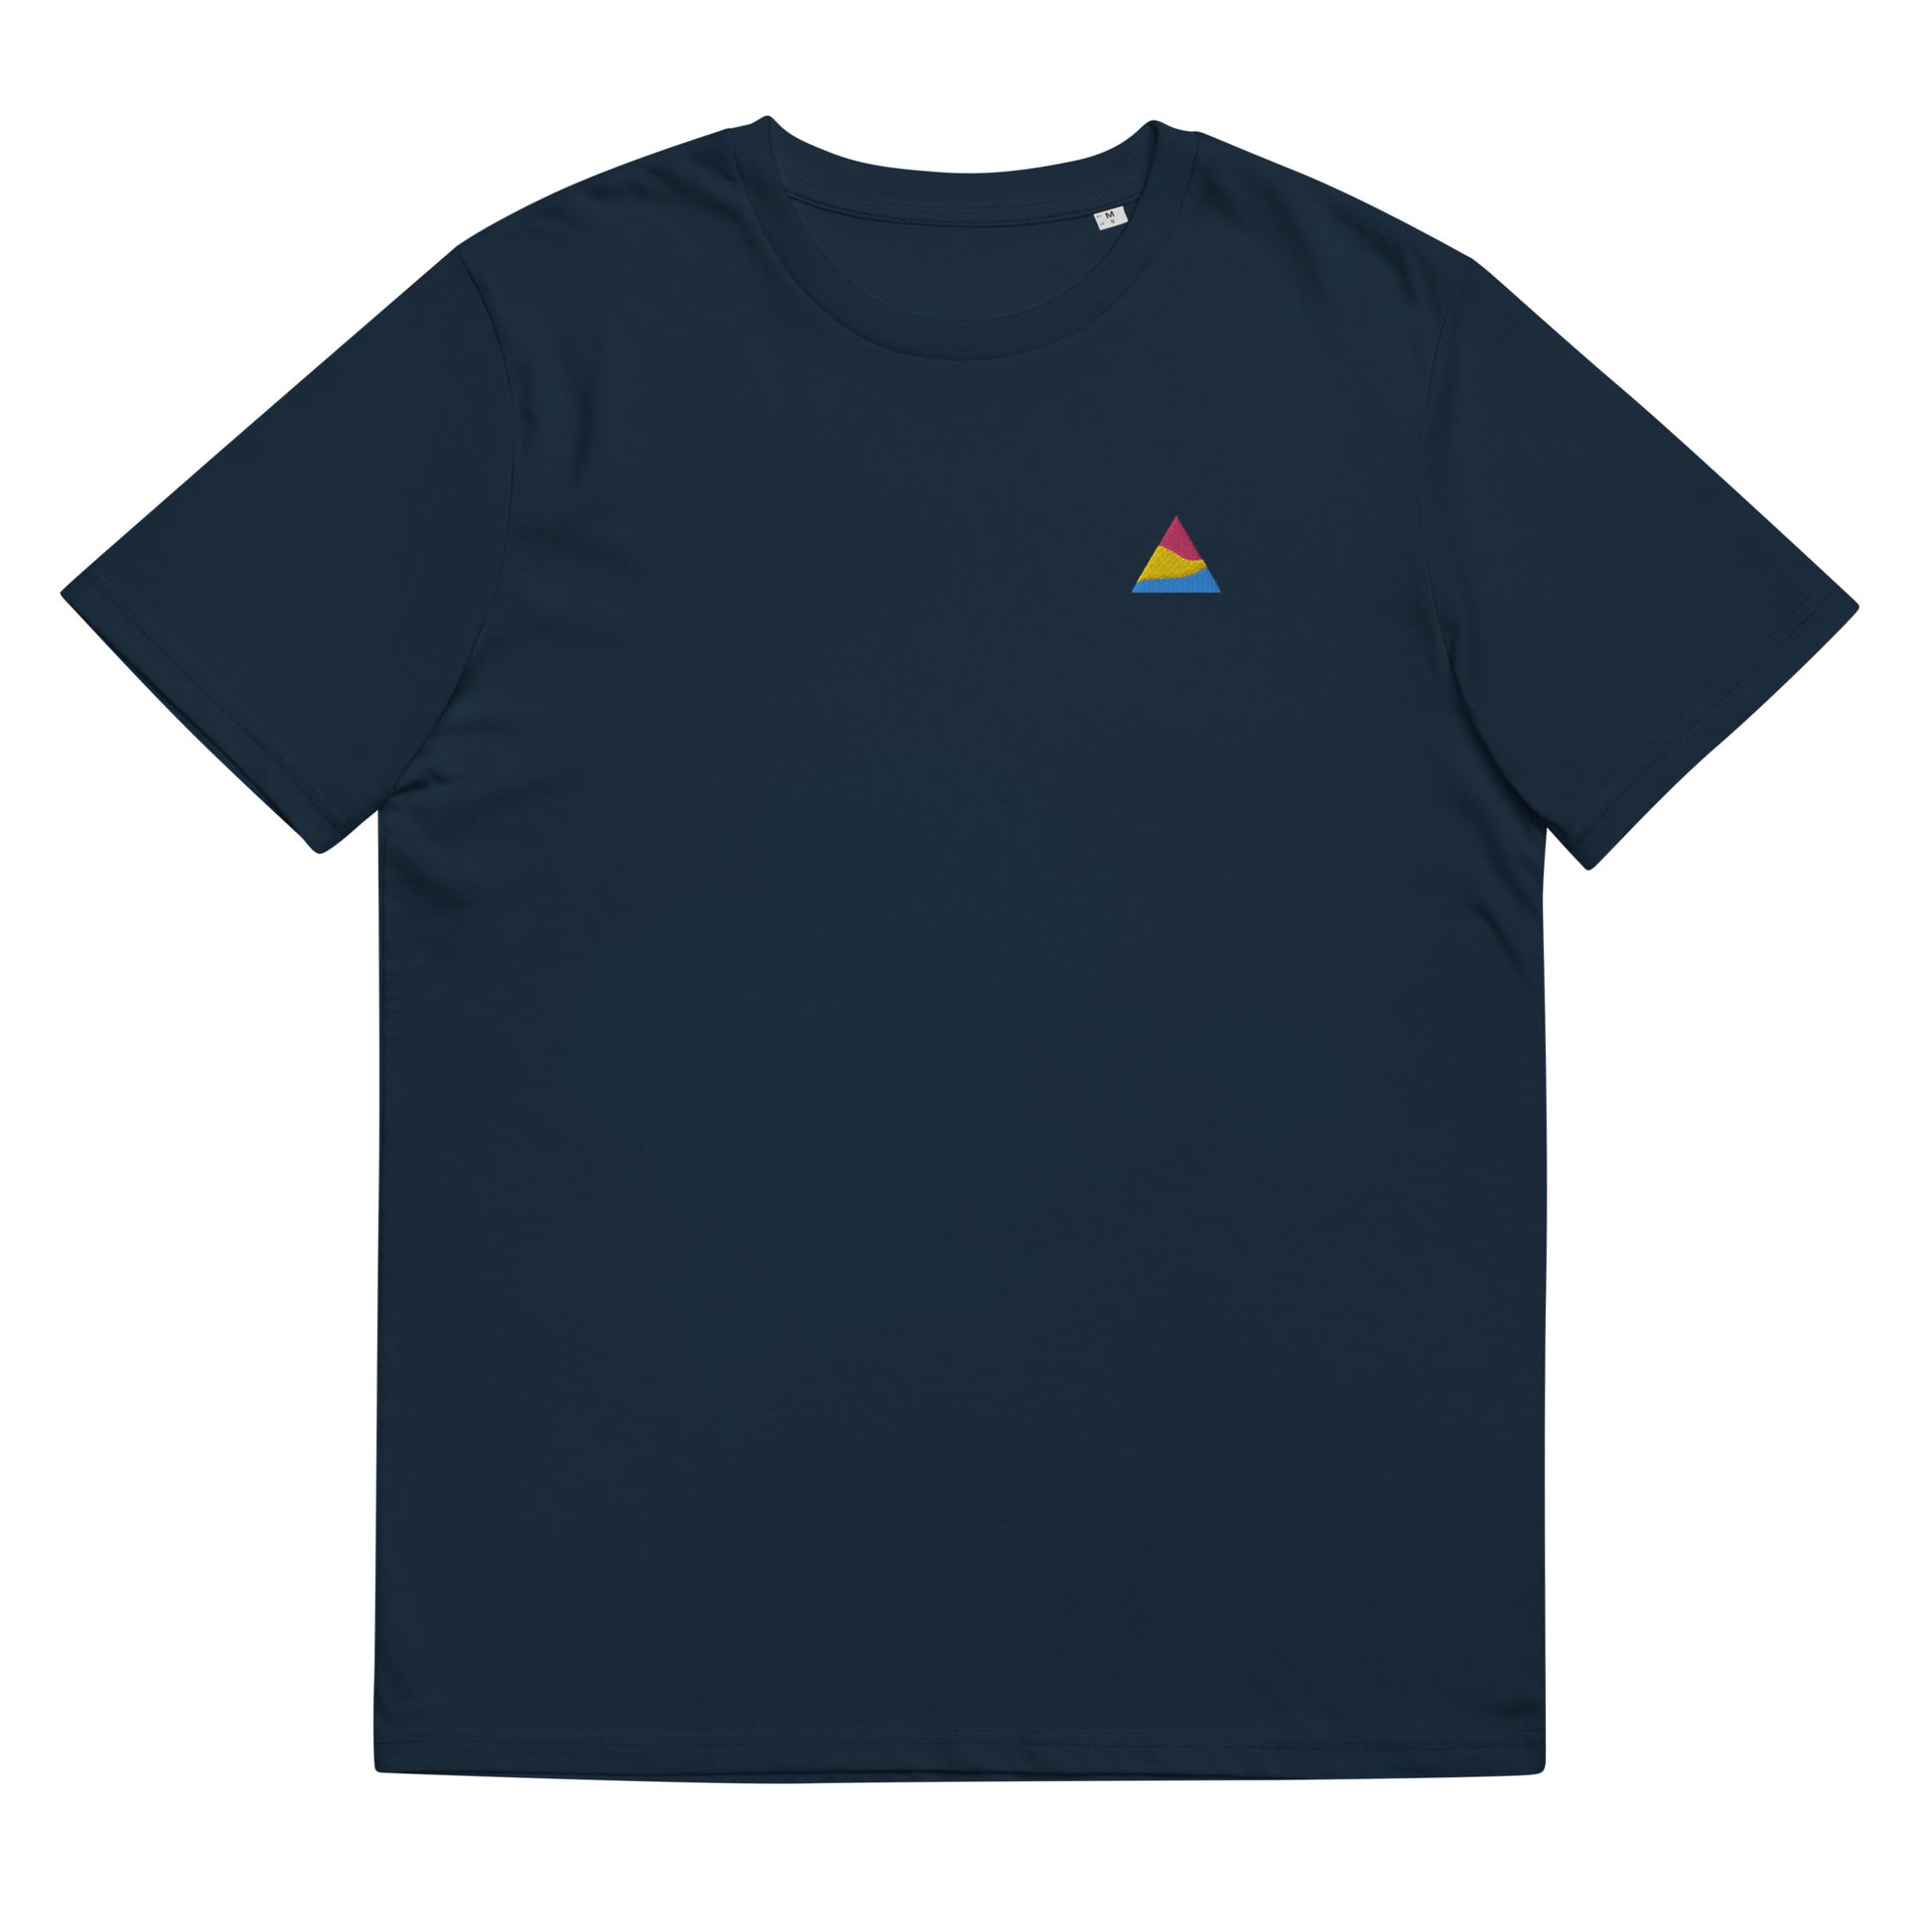 Fitted french navy blue organic cotton t-shirt with a small embroidered triangle in pansexual colors on the left chest. Available in sizes S to 3XL.